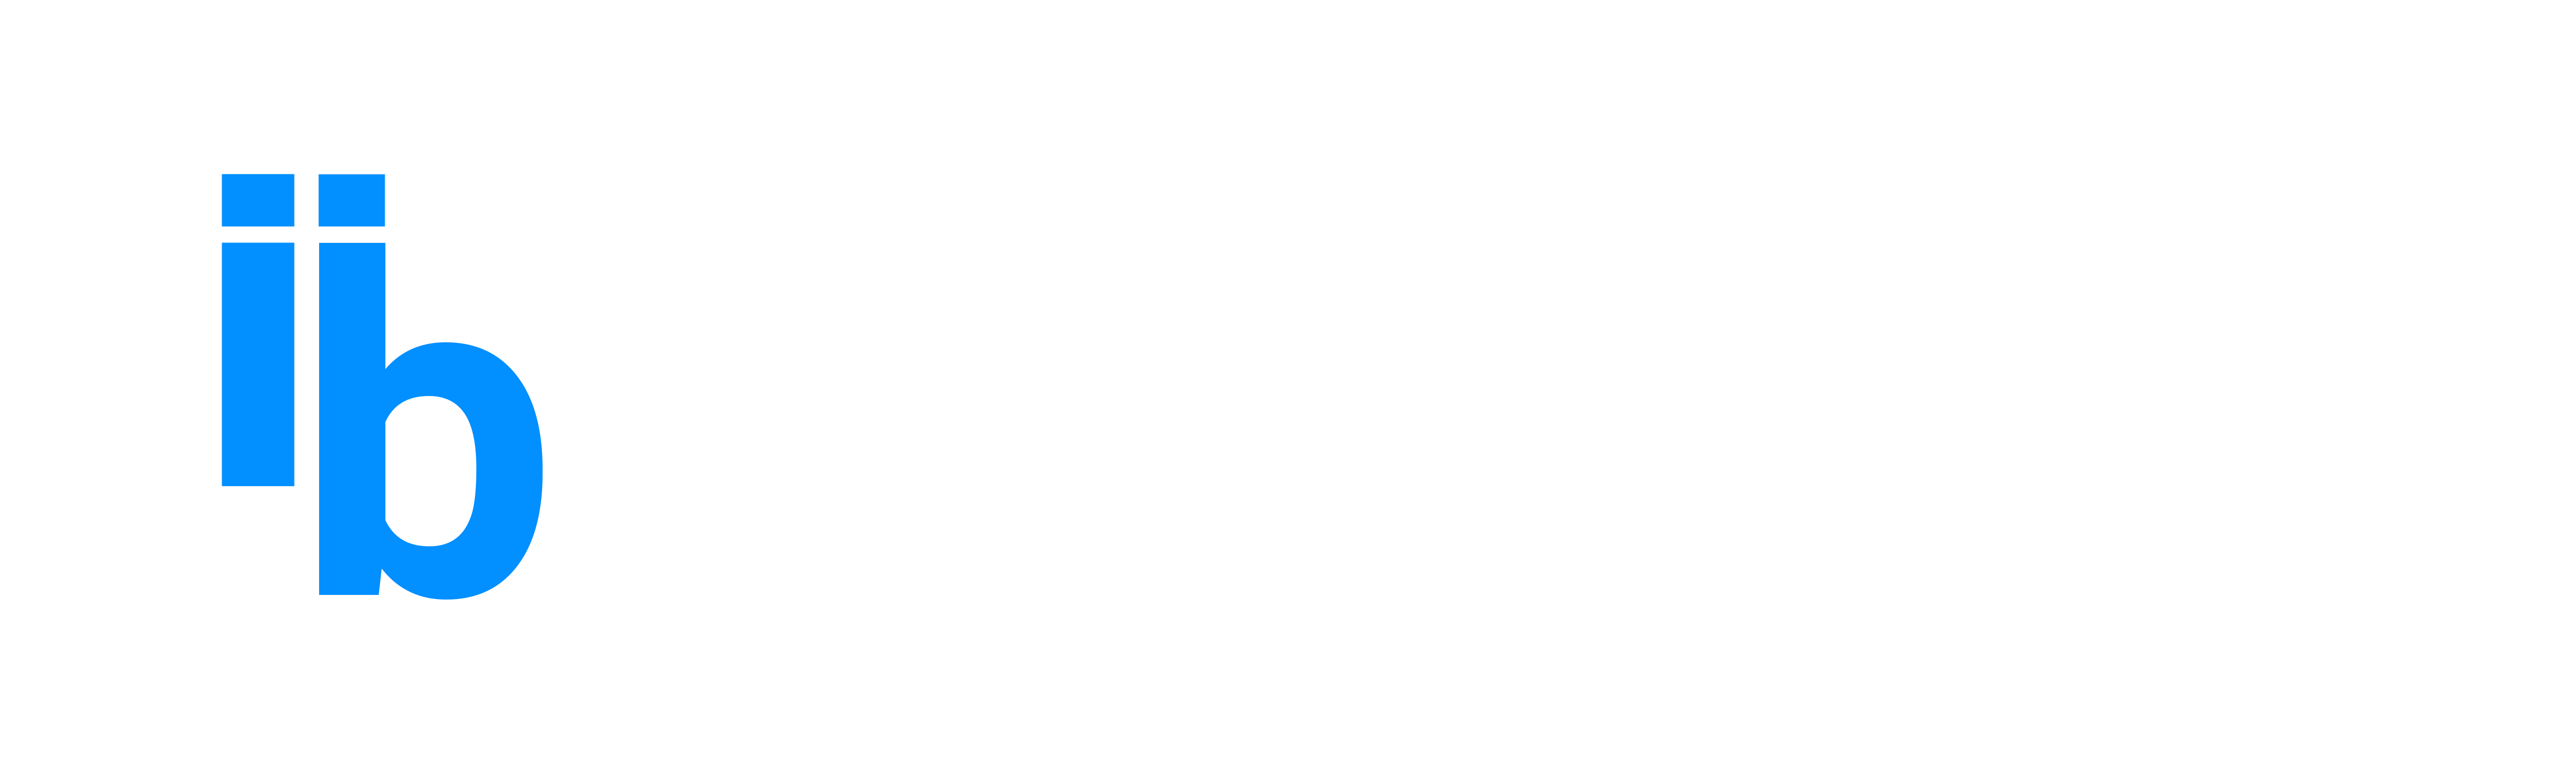 Instaabook White Logo